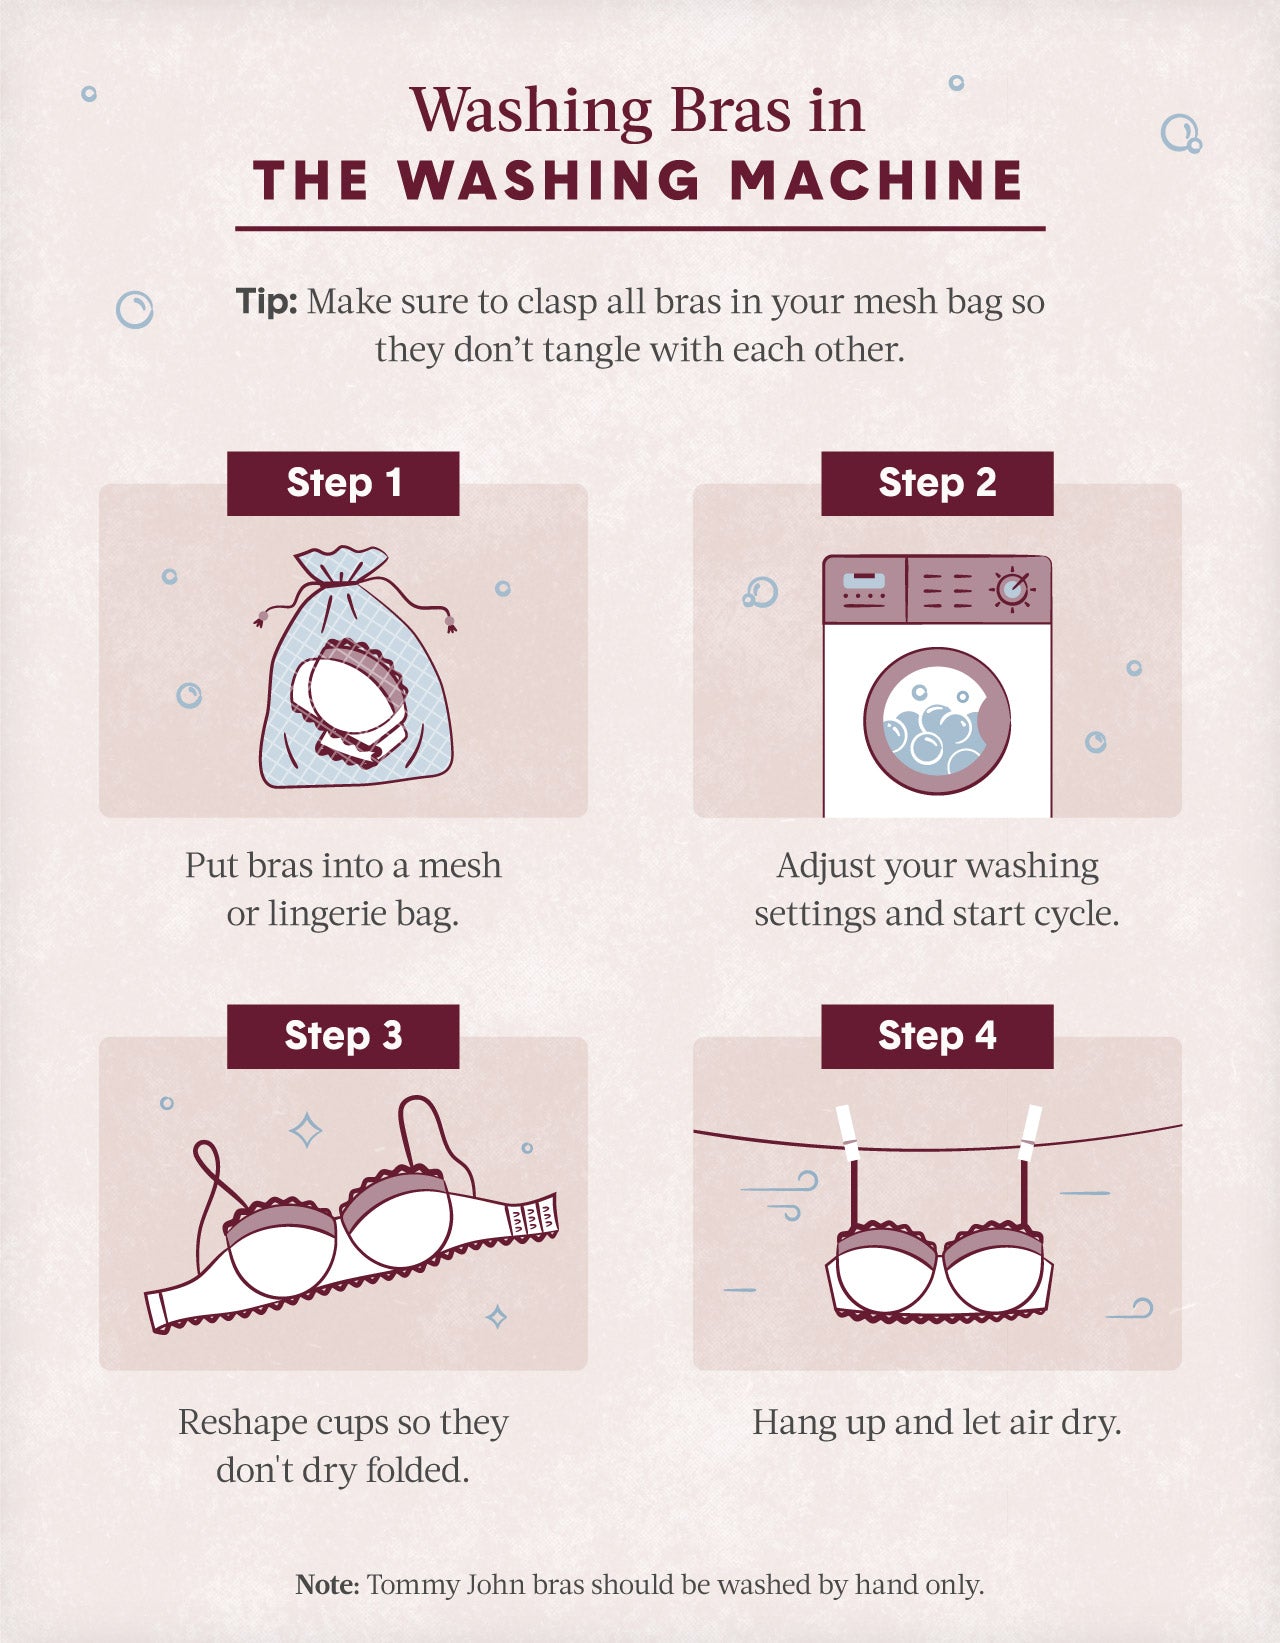 How to Wash Bras + Bra Care FAQs | Tommy John